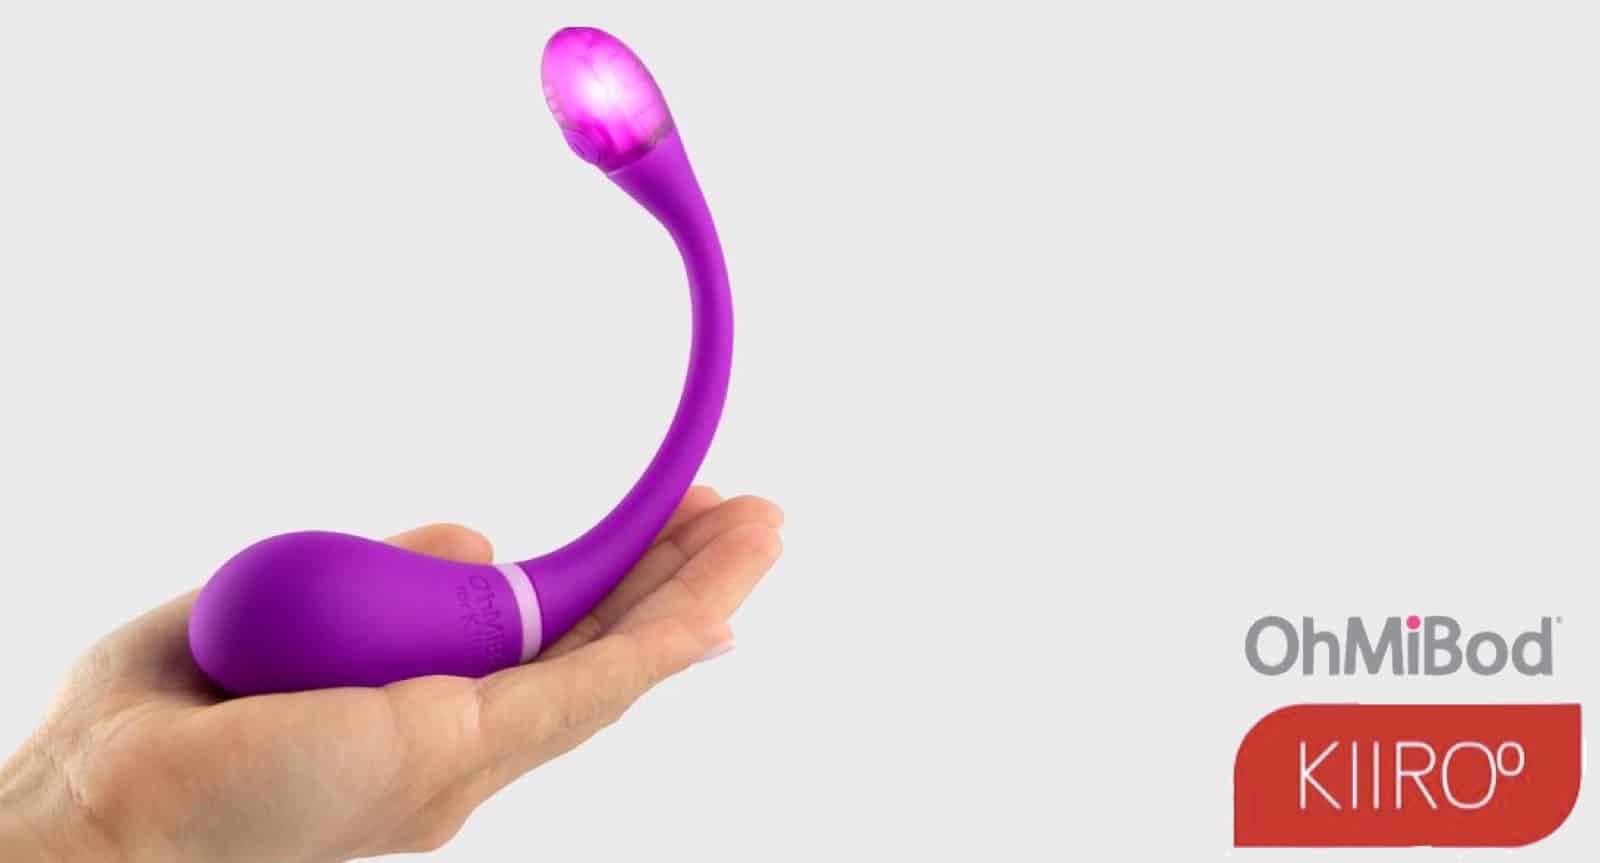 The OhMiBod Esca2 is a collaboration that brings interactivity powered by K...